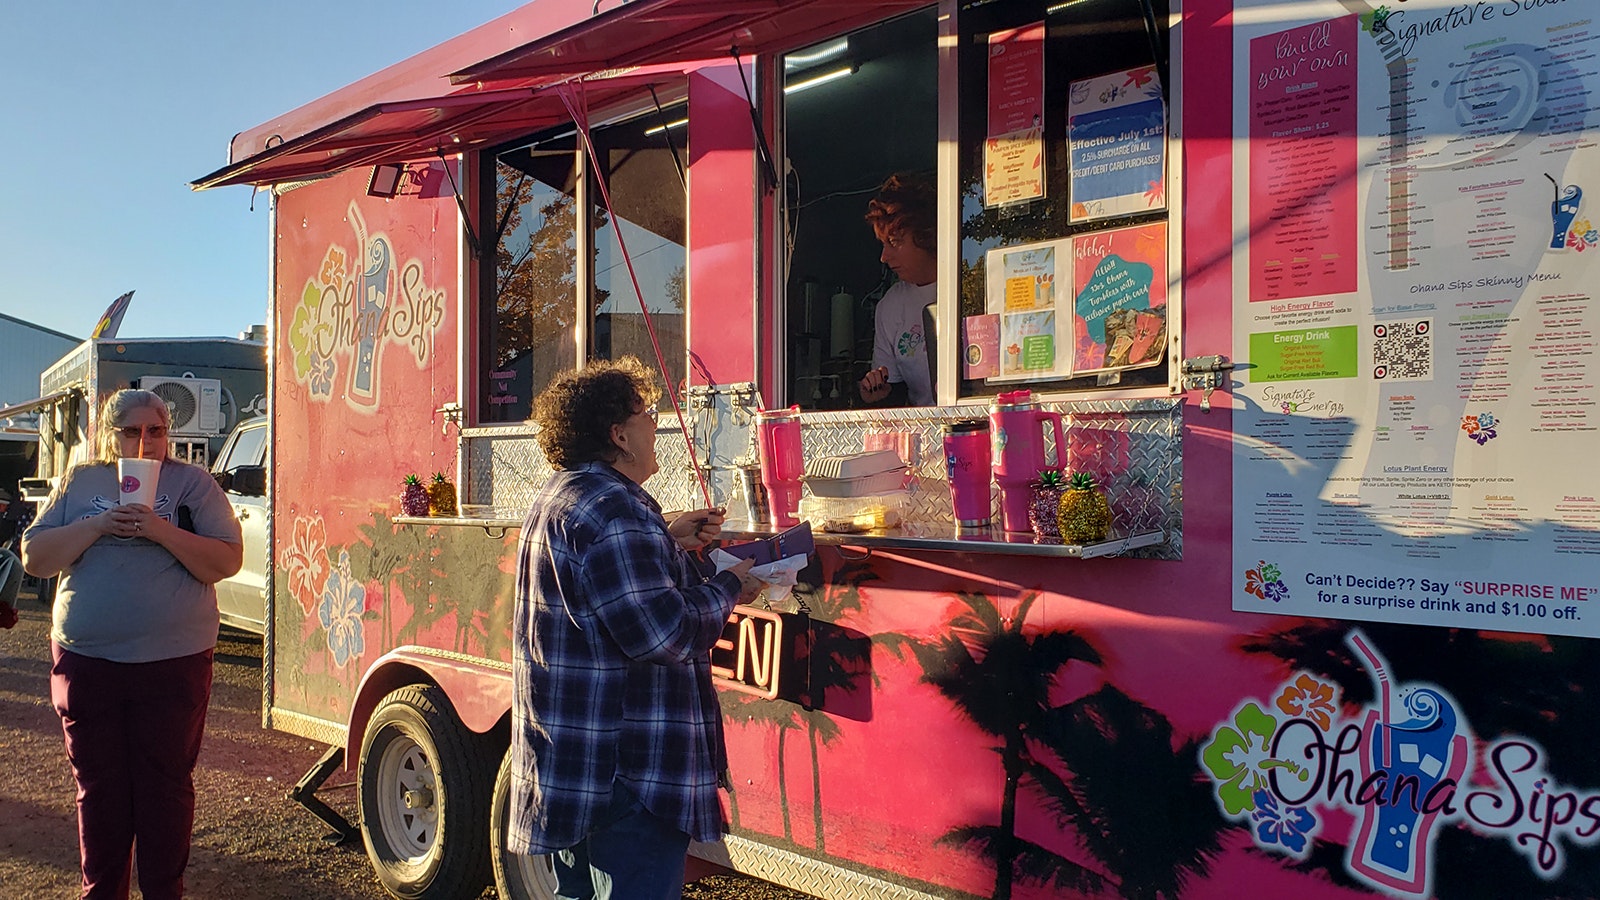 Ohana Sips was the people's choice at a recent food truck rally in Rawlins.